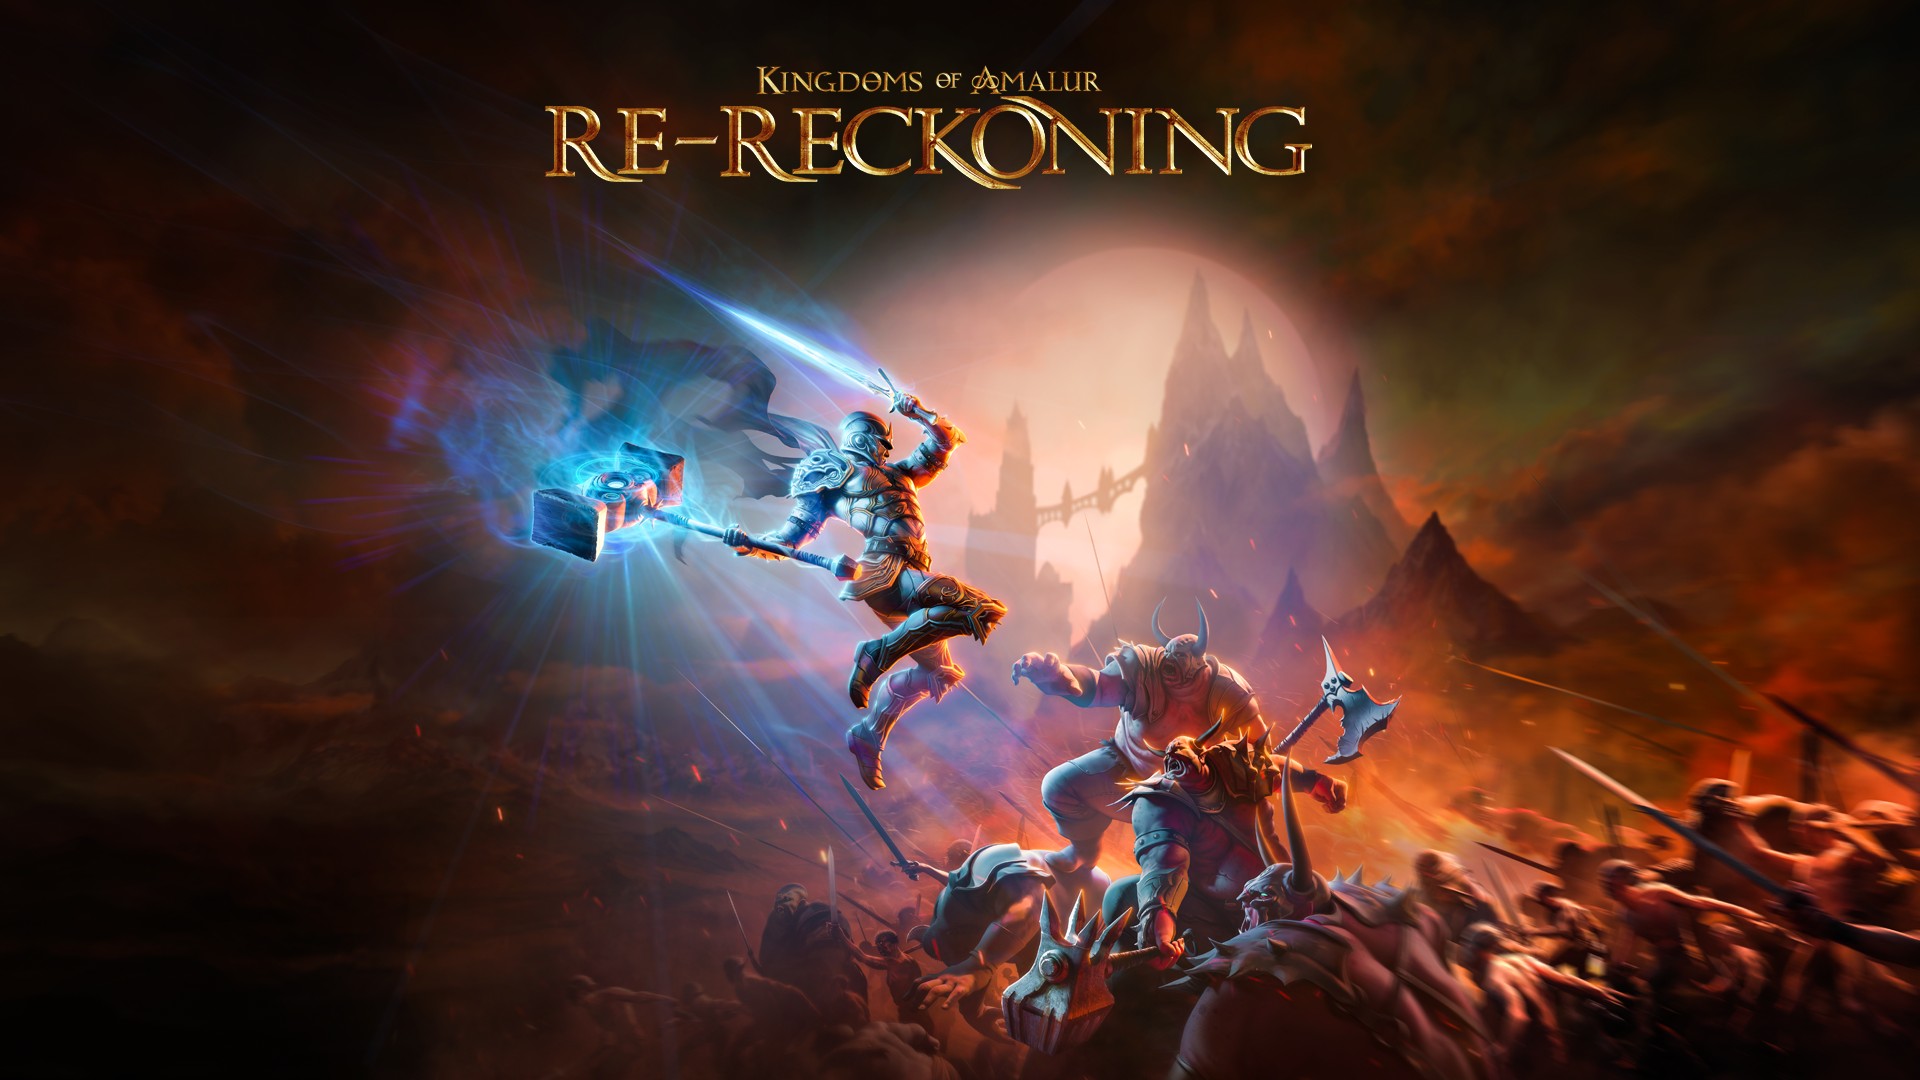 Video For The Re-Reckoning in Amalur Starts Today on Xbox One